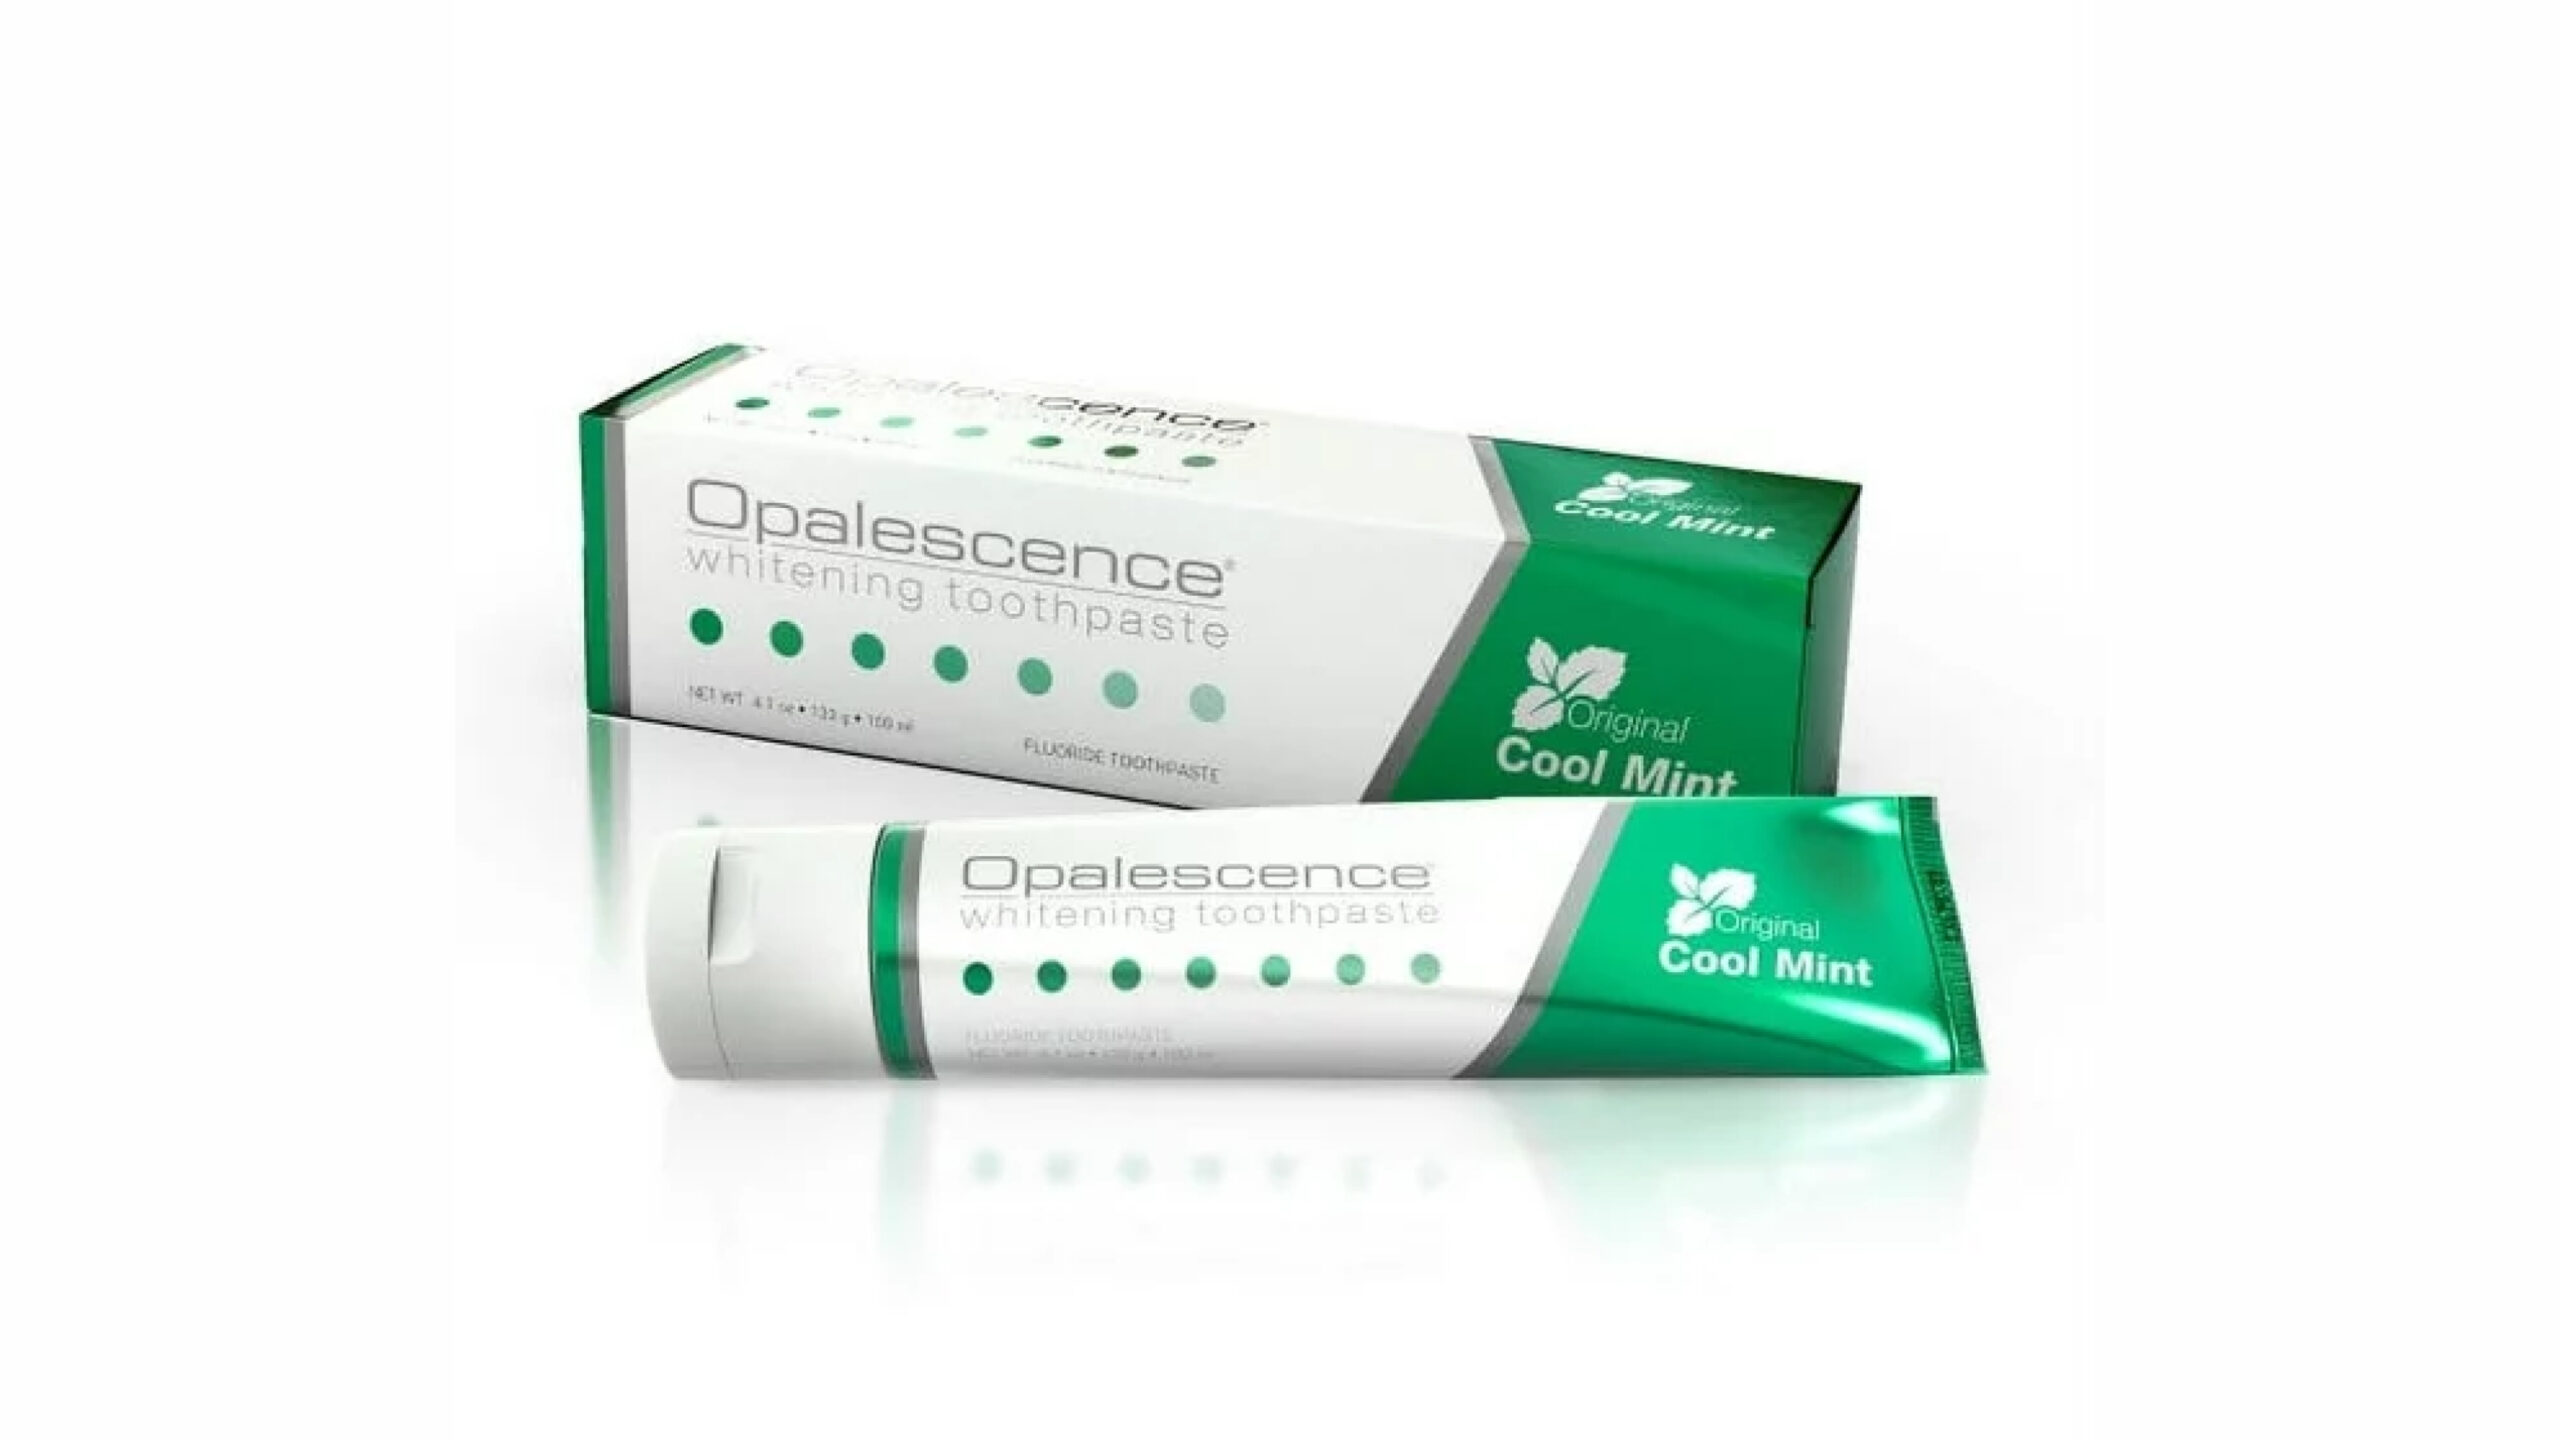 a packet of opalescence whitening toothpaste original formula - oral care, mint flavor, gluten free